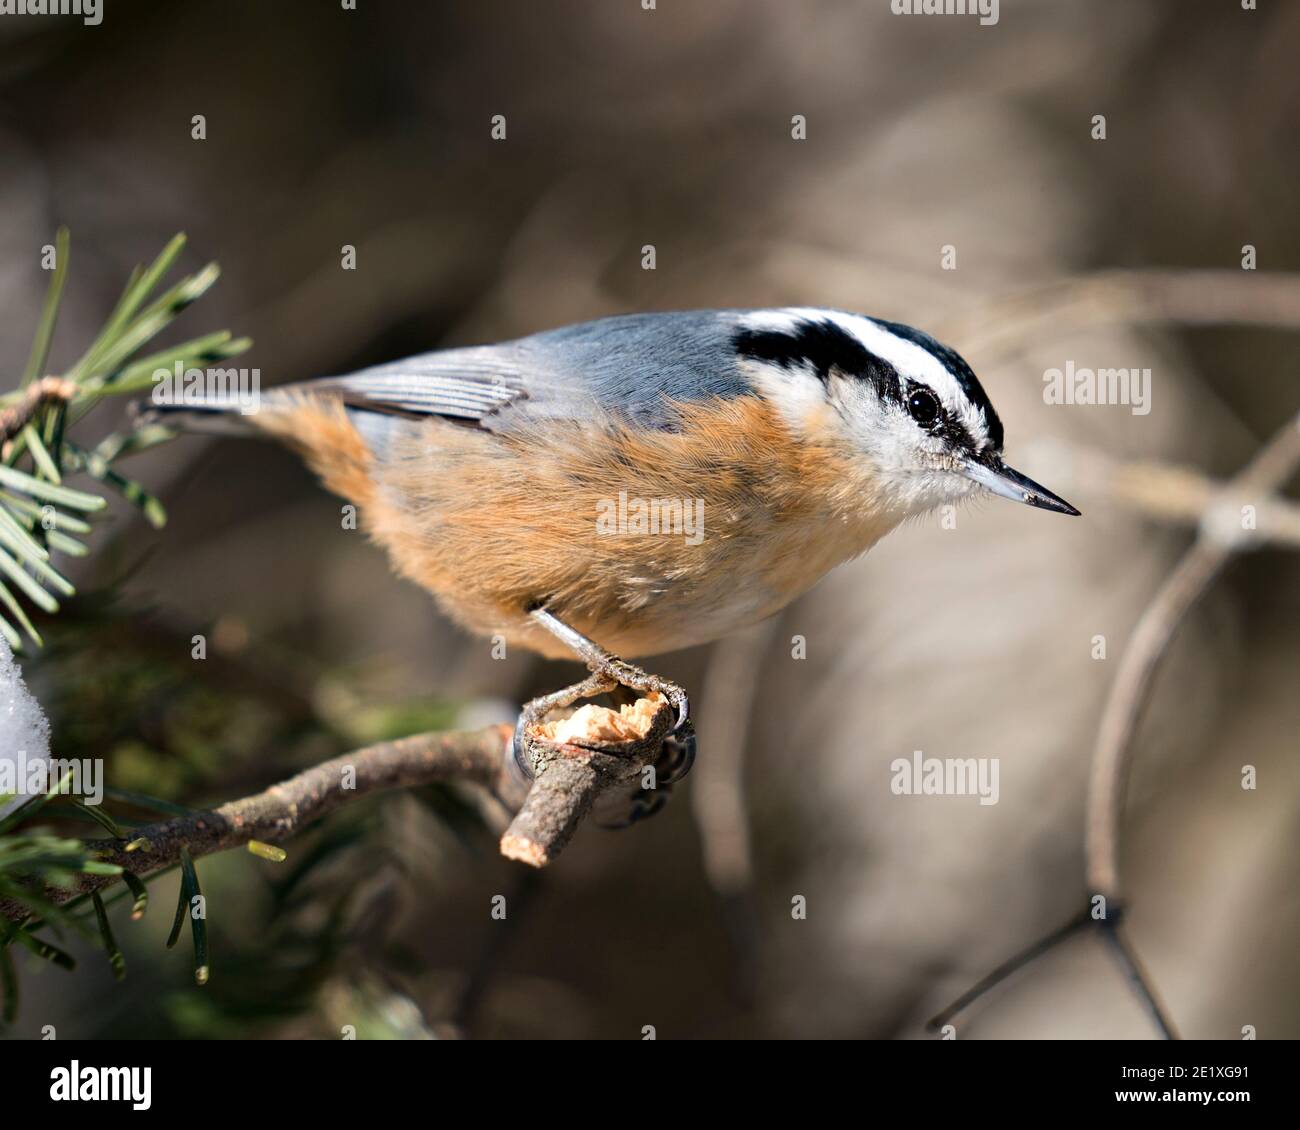 Nuthatch close-up profile view perched on a tree branch in its environment and habitat with a blur background, displaying feather plumage and bird tai Stock Photo